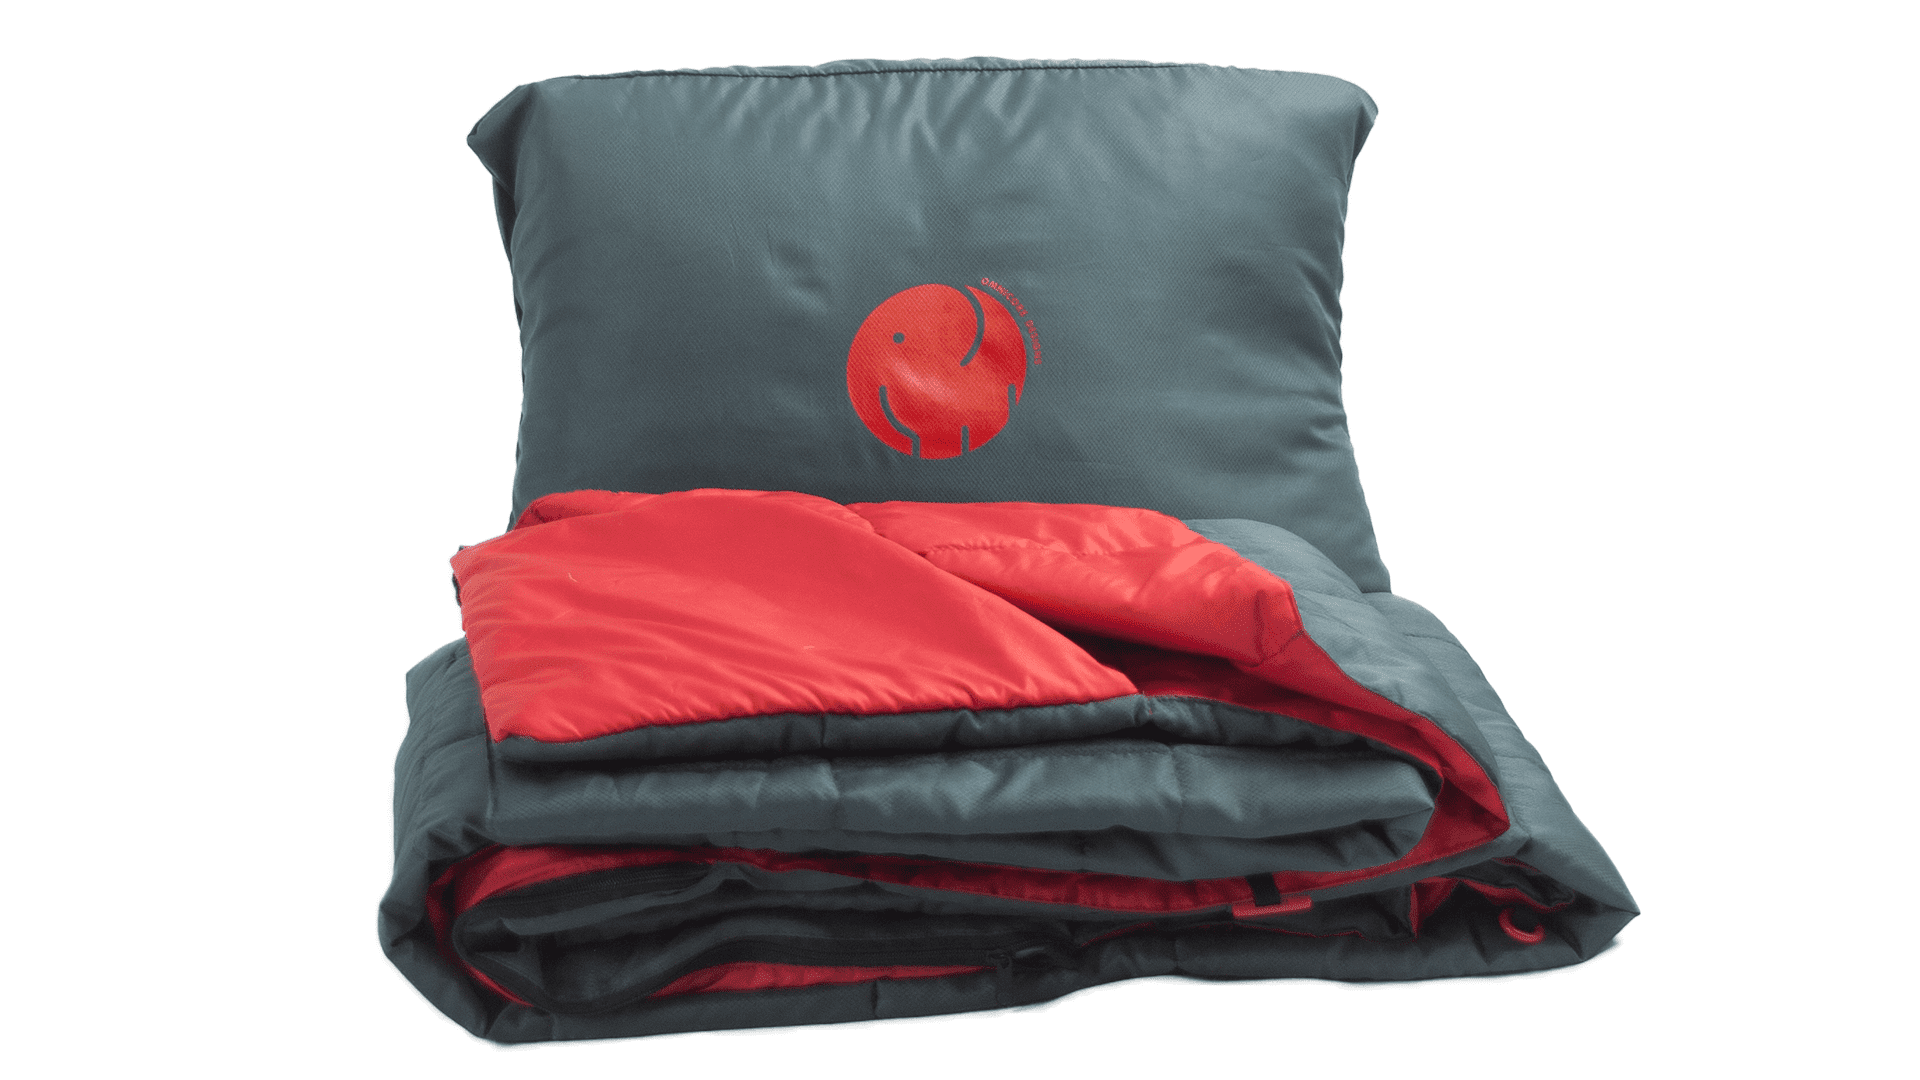 StratusLoft Synthetic Down 70" x 50" Modern Camp Pillow & Blanket